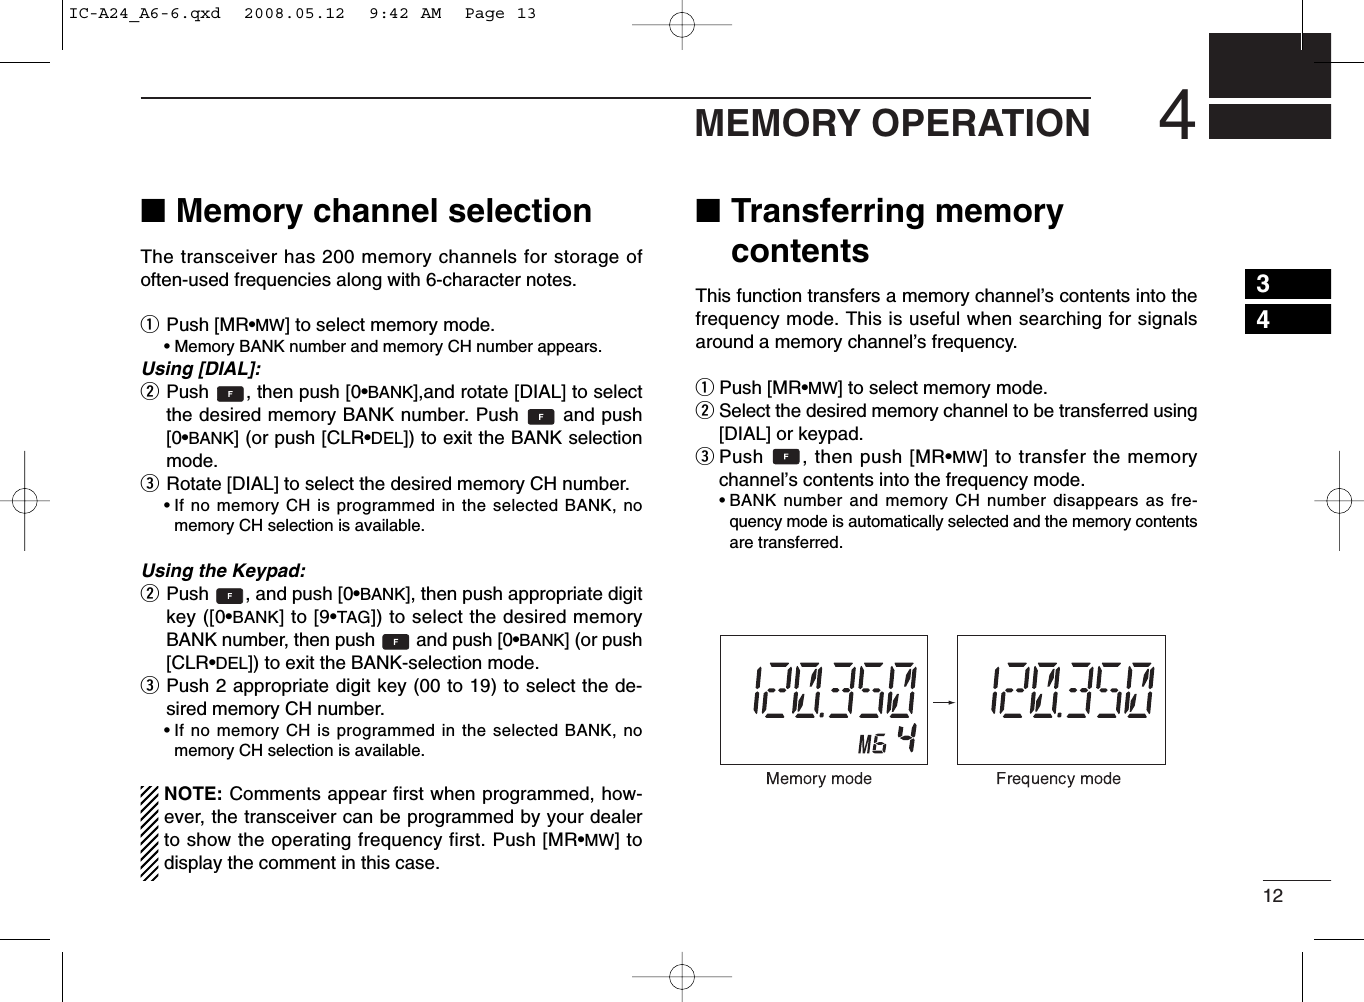 124MEMORY OPERATION■Memory channel selectionThe transceiver has 200 memory channels for storage ofoften-used frequencies along with 6-character notes.qPush [MR•MW] to select memory mode.•Memory BANK number and memory CH number appears.Using [DIAL]:wPush  , then push [0•BANK],and rotate [DIAL] to selectthe desired memory BANK number. Push  and push[0•BANK] (or push [CLR•DEL]) to exit the BANK selectionmode.eRotate [DIAL] to select the desired memory CH number.•If no memory CH is programmed in the selected BANK, nomemory CH selection is available.Using the Keypad:wPush  , and push [0•BANK], then push appropriate digitkey ([0•BANK] to [9•TAG]) to select the desired memoryBANK number, then push  and push [0•BANK] (or push[CLR•DEL]) to exit the BANK-selection mode.ePush 2 appropriate digit key (00 to 19) to select the de-sired memory CH number.•If no memory CH is programmed in the selected BANK, nomemory CH selection is available.NOTE: Comments appear first when programmed, how-ever, the transceiver can be programmed by your dealerto show the operating frequency first. Push [MR•MW] todisplay the comment in this case.■Transferring memorycontentsThis function transfers a memory channel’s contents into thefrequency mode. This is useful when searching for signalsaround a memory channel’s frequency.qPush [MR•MW] to select memory mode.wSelect the desired memory channel to be transferred using[DIAL] or keypad.ePush  , then push [MR•MW] to transfer the memorychannel’s contents into the frequency mode.•BANK number and memory CH number disappears as fre-quency mode is automatically selected and the memory contentsare transferred.34IC-A24_A6-6.qxd  2008.05.12  9:42 AM  Page 13